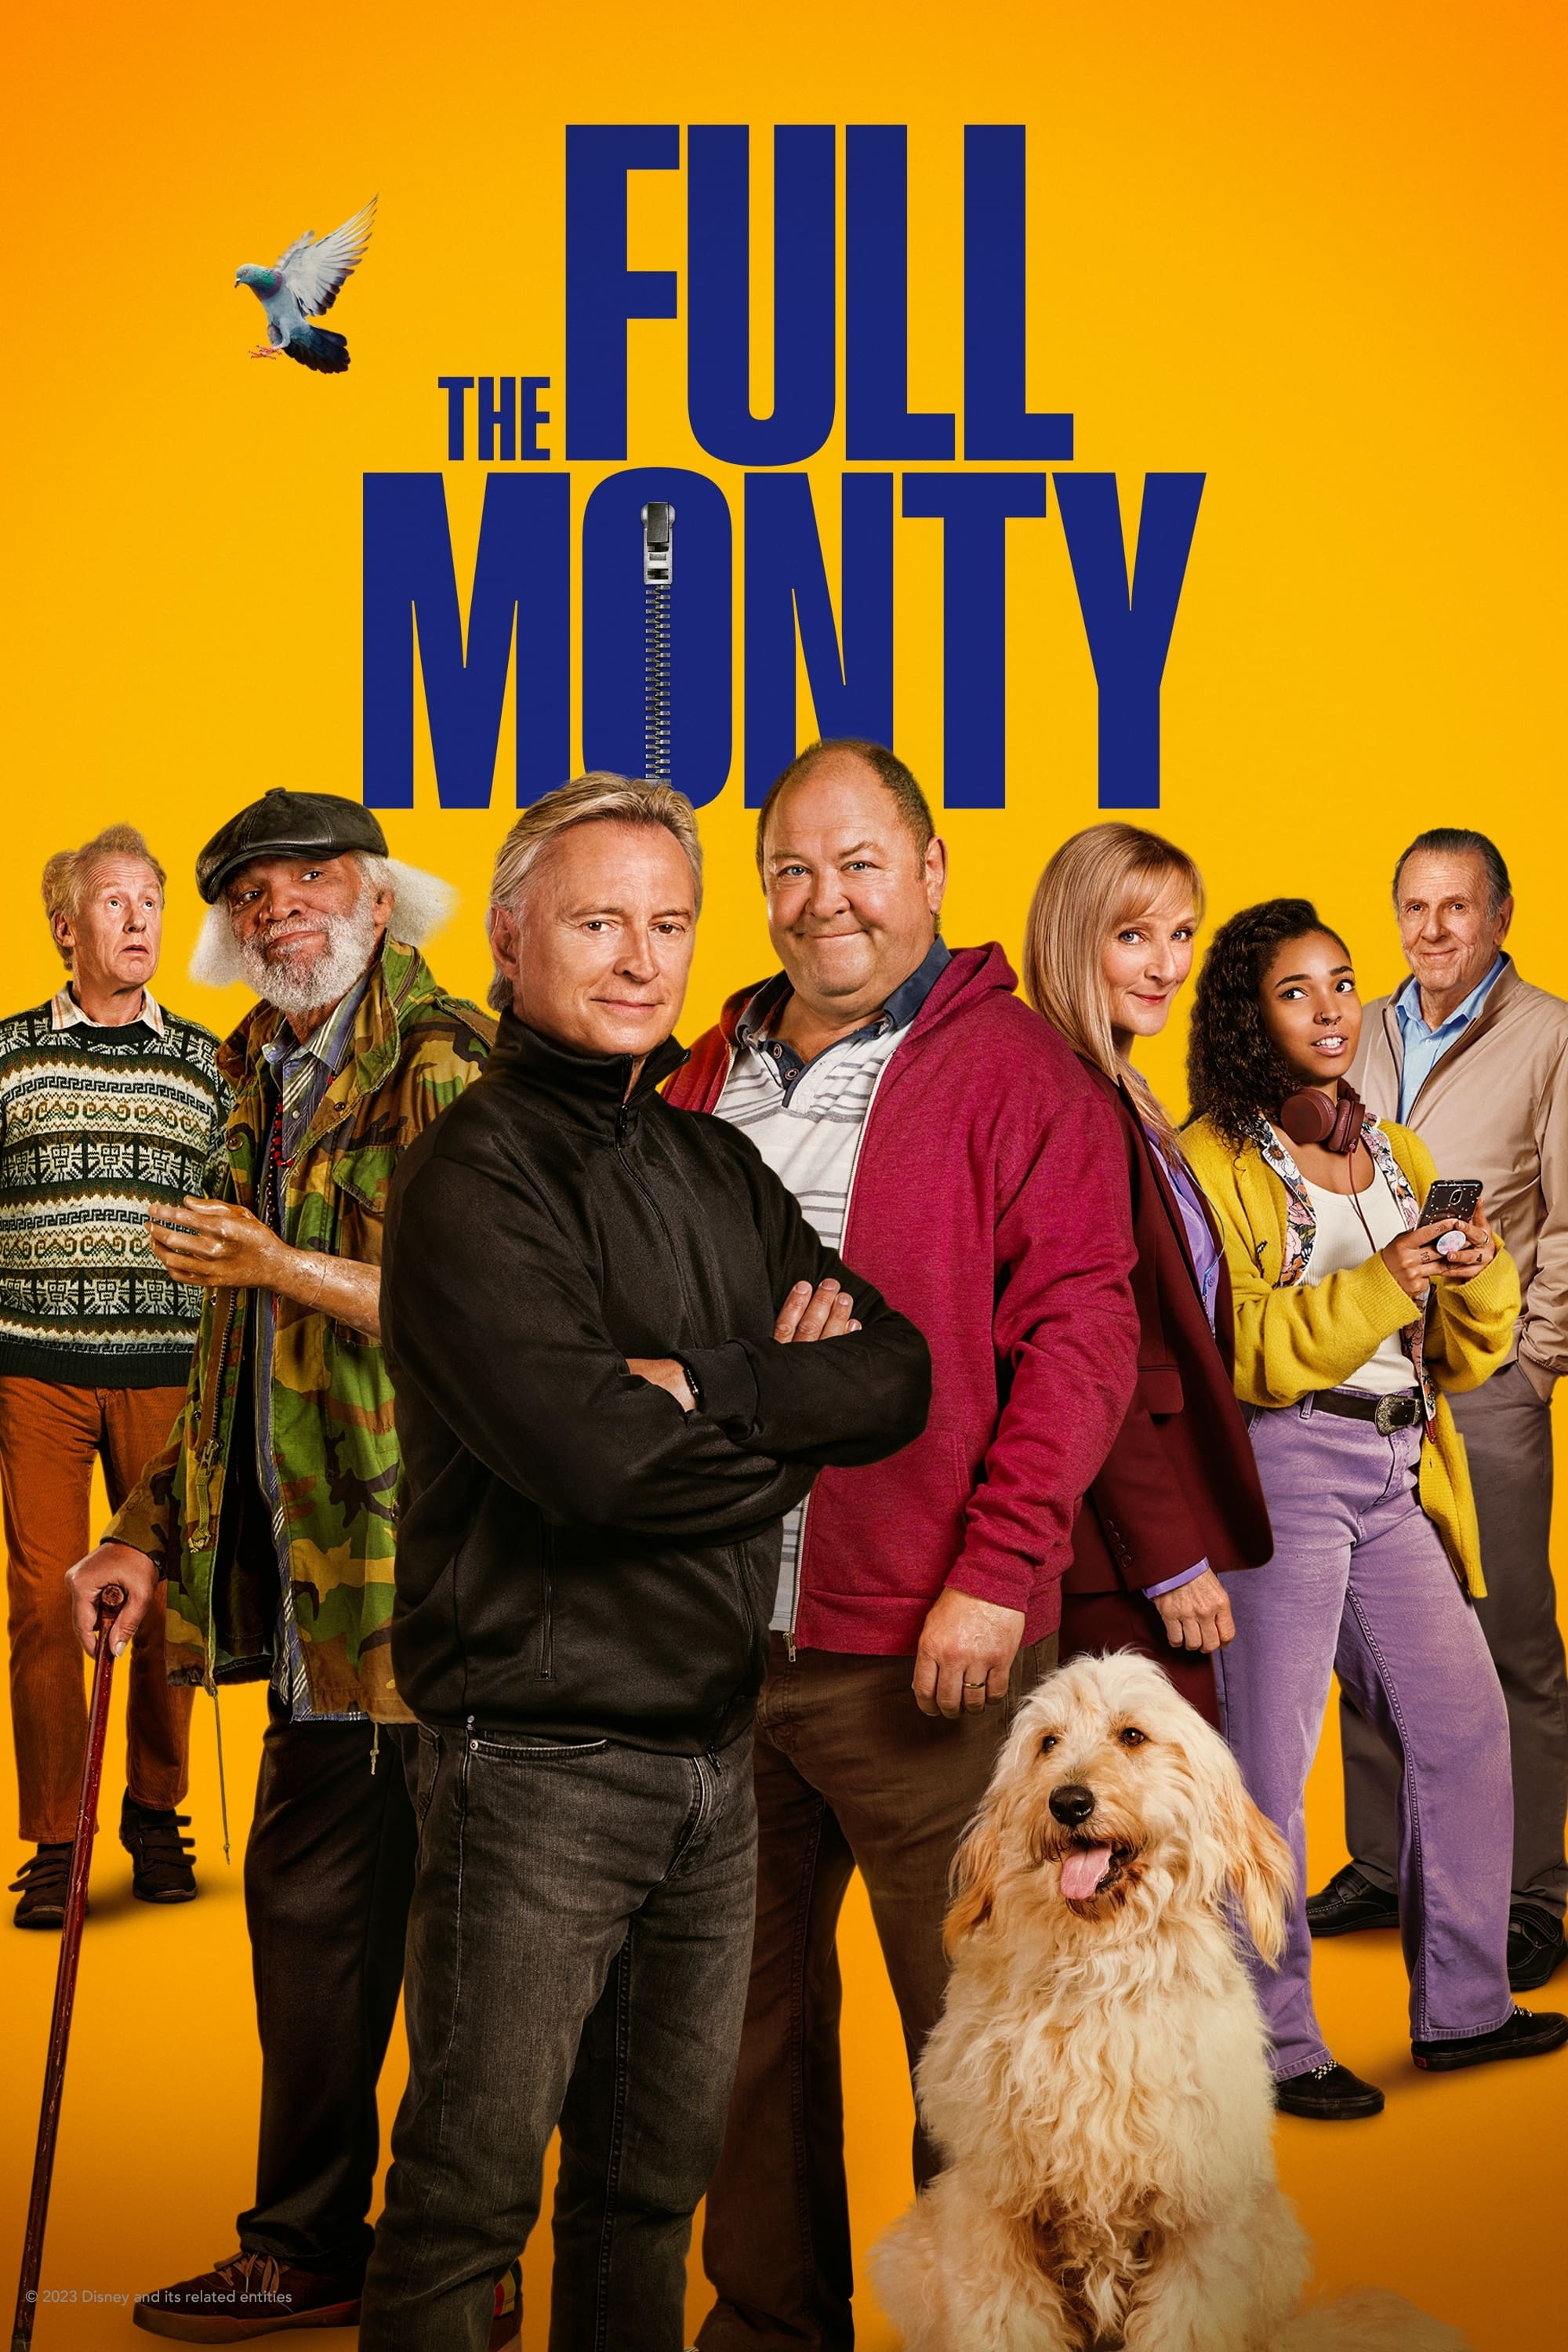 The Full Monty TV Shows About Based On Movie